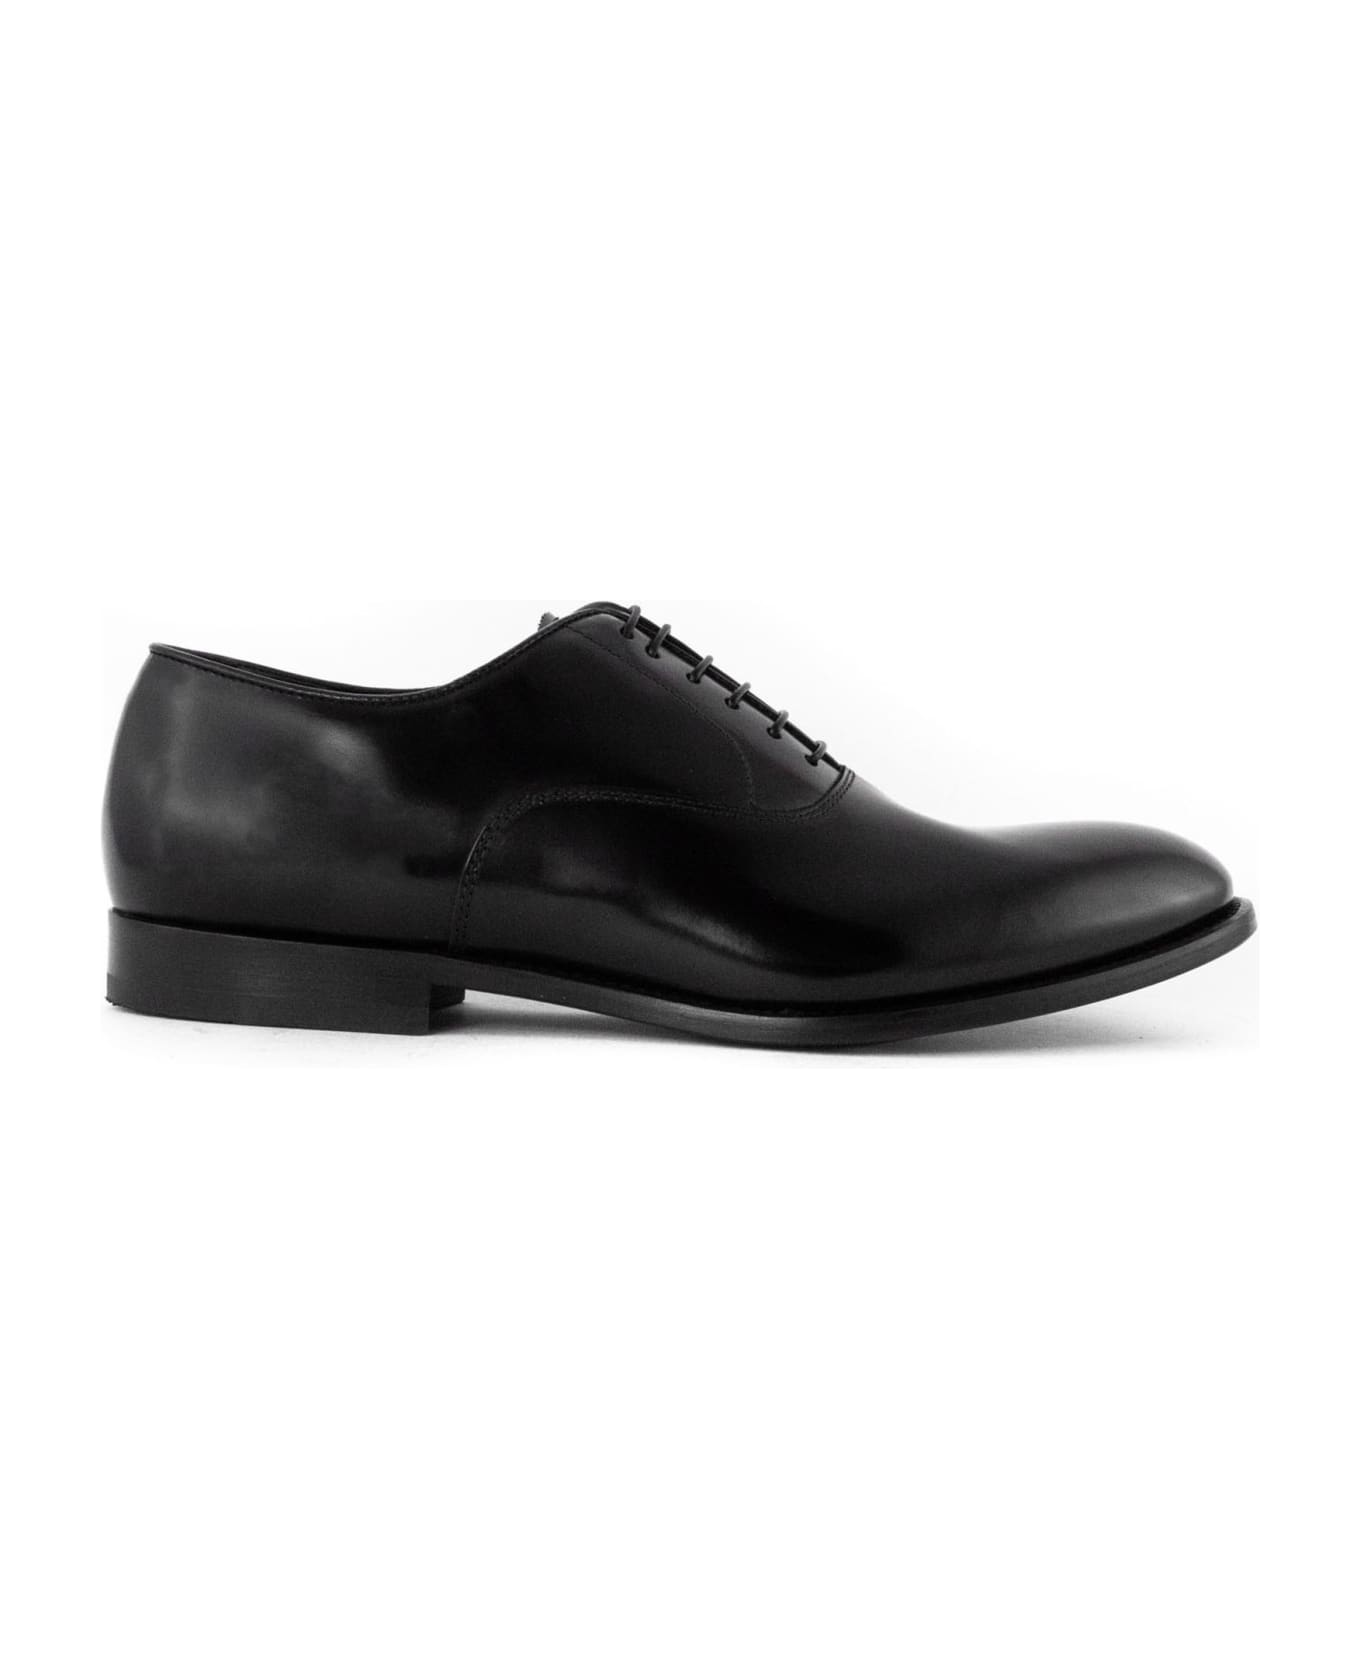 Doucal's Oxford Black Leather Laced Shoes - Black